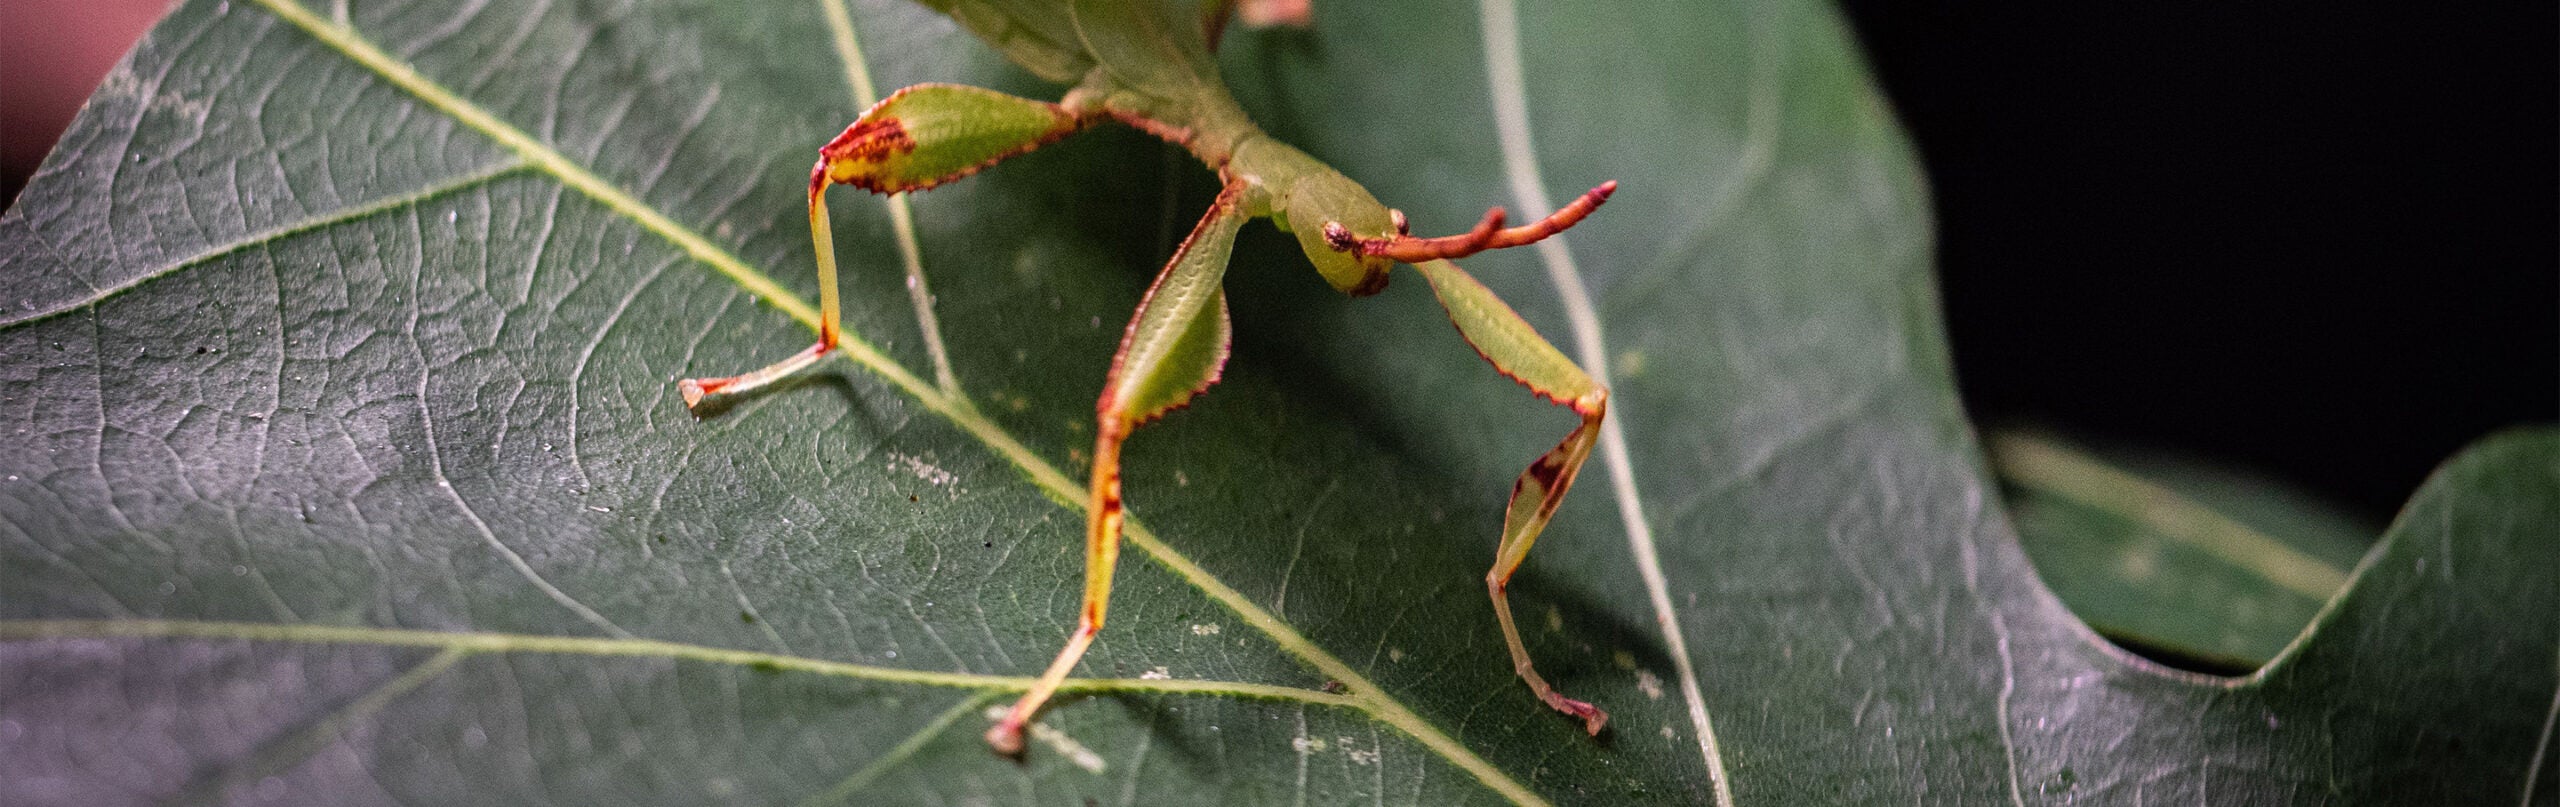 Leaf Insect 2